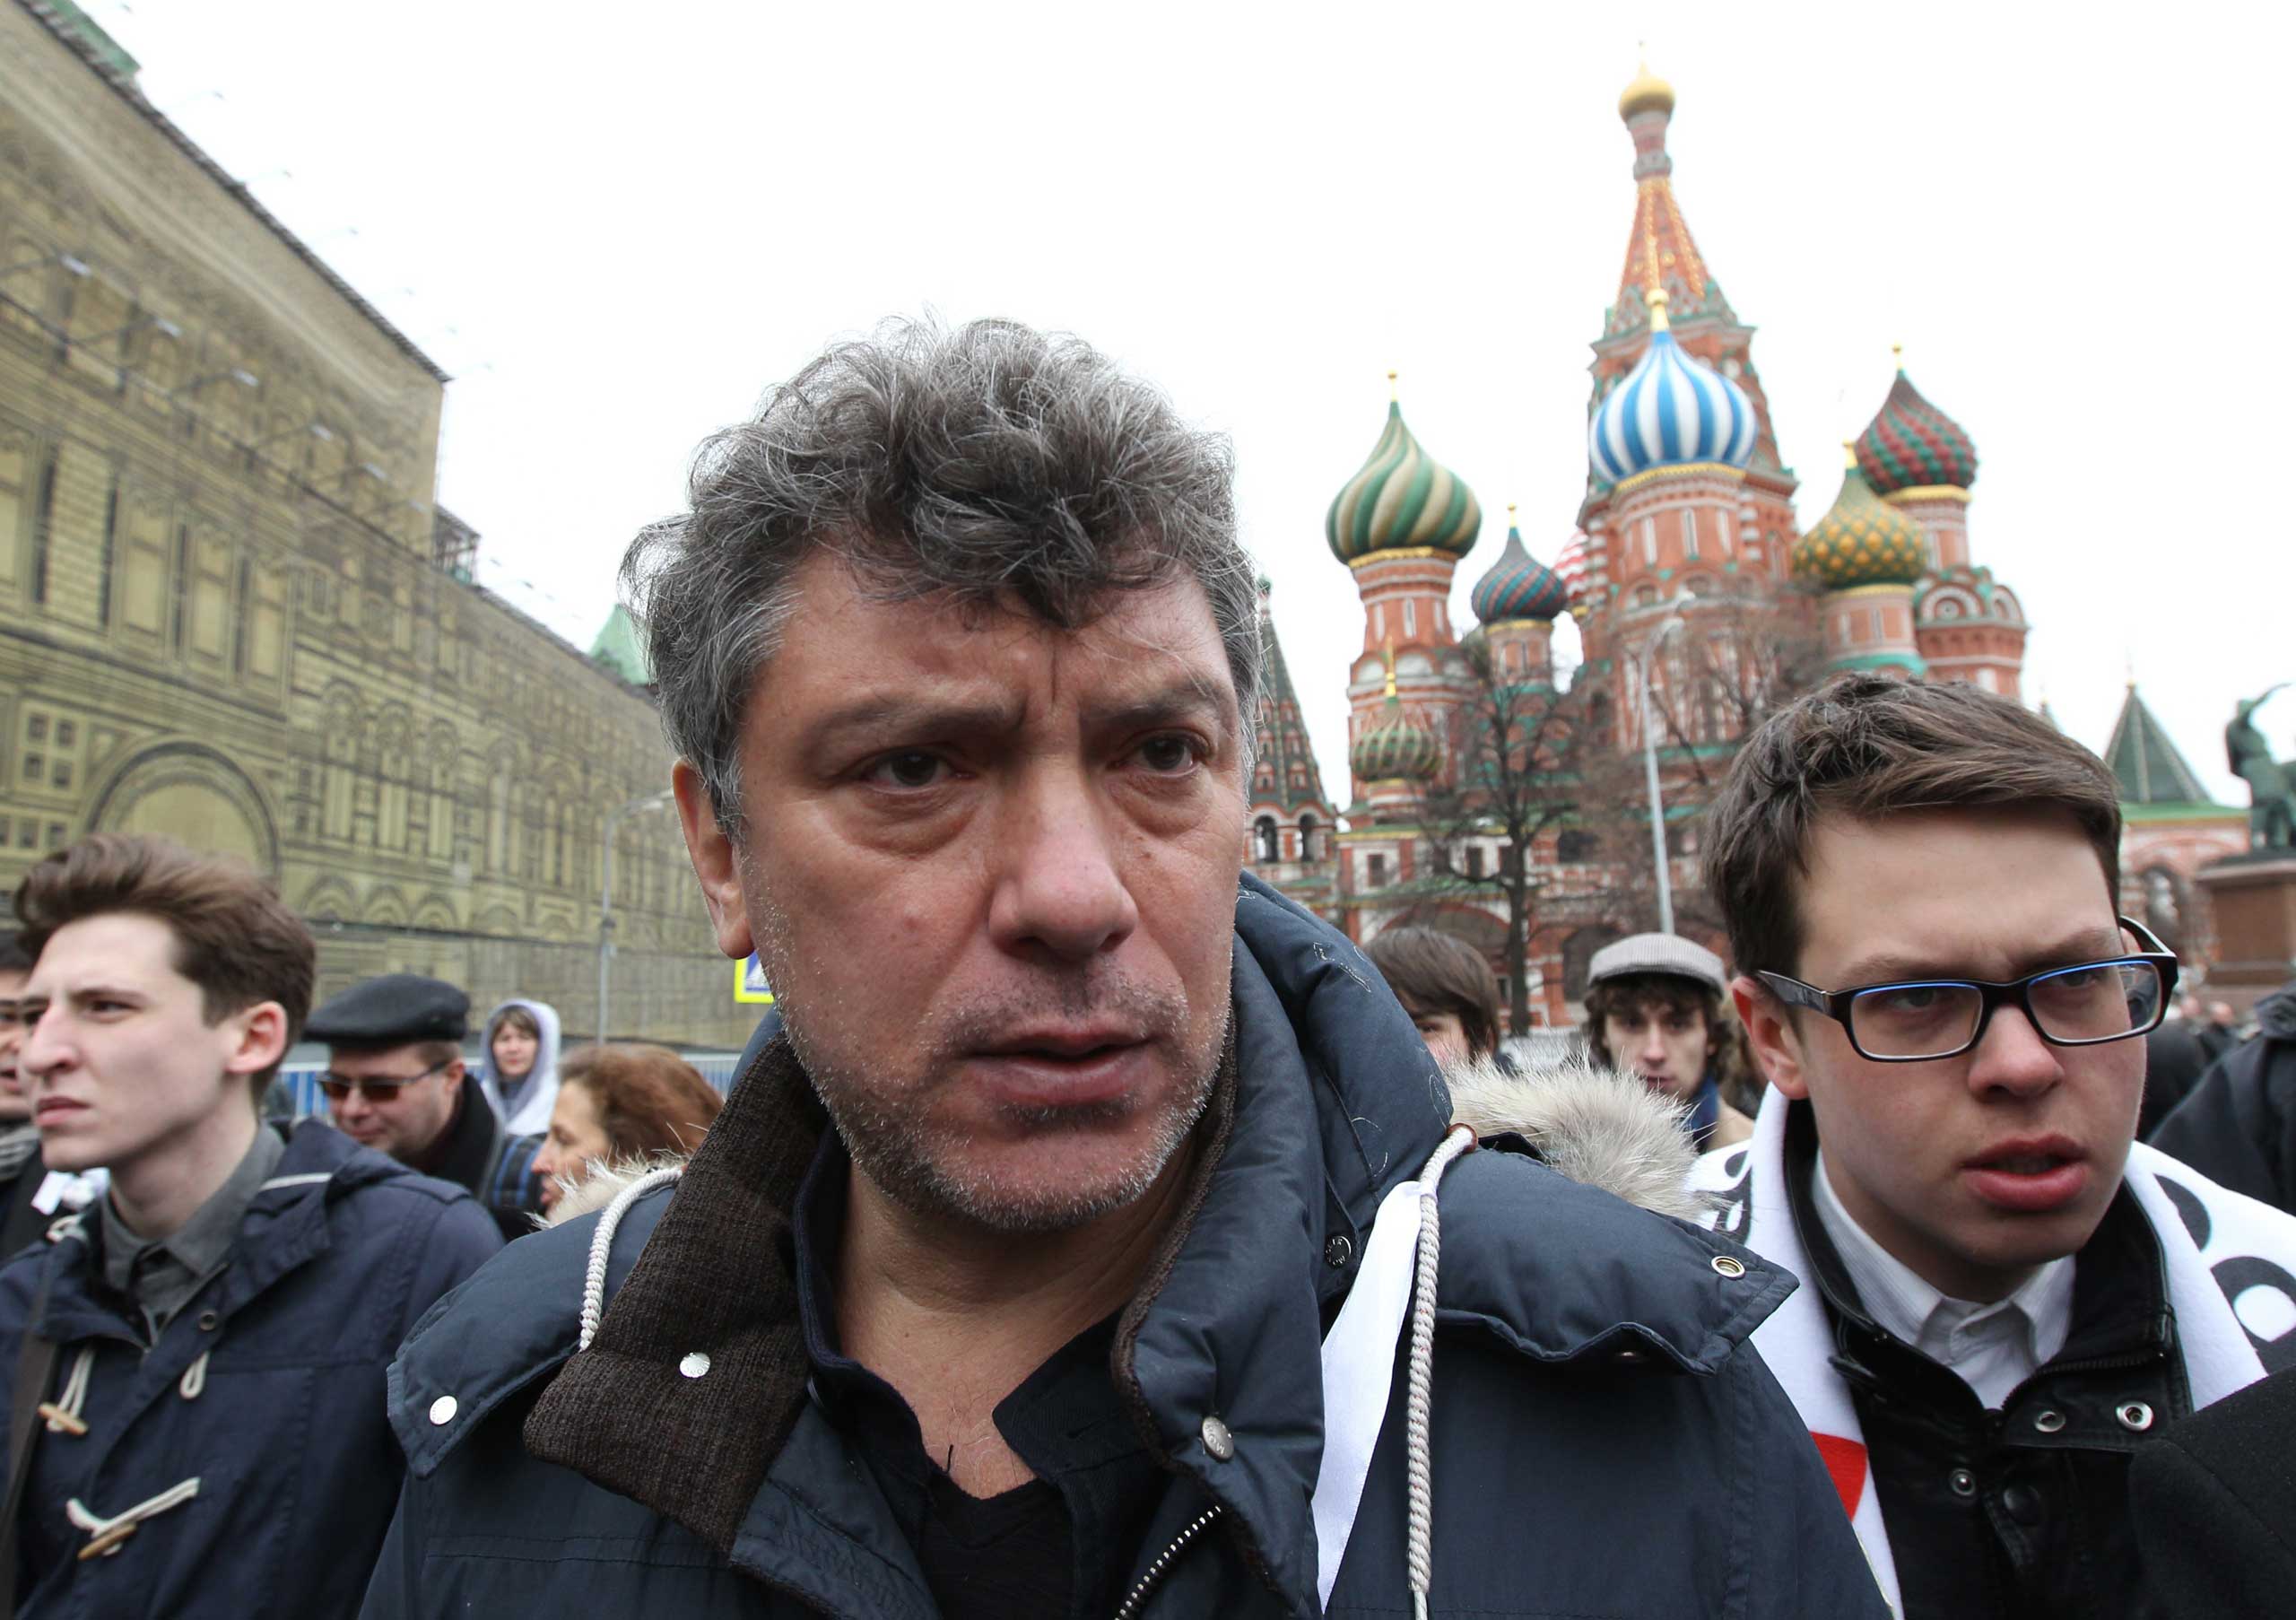 Boris Nemtsov, center, and other opposition activists attend a rally at Red Square on April 8, 2012 in Moscow. (Sasha Mordovets—Getty Images)